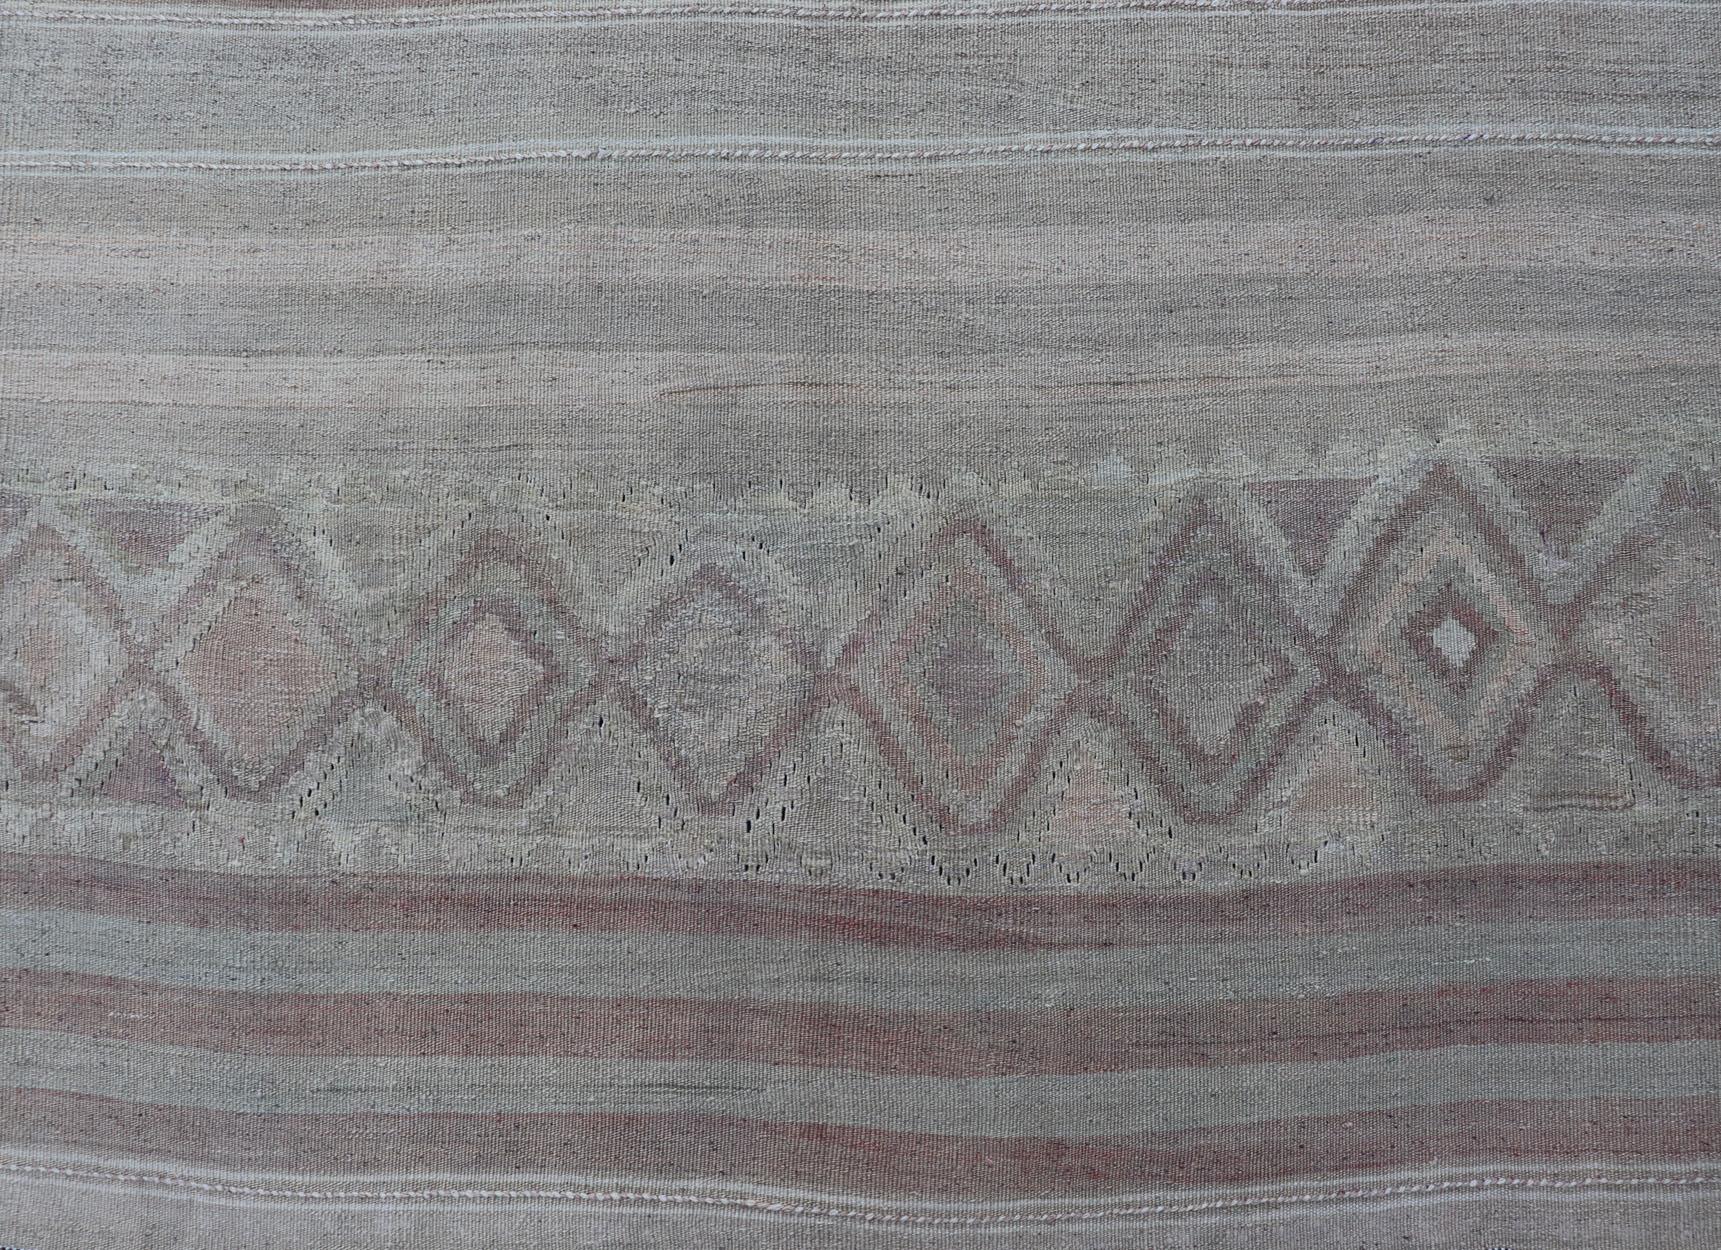 Minimalist design with Faint stripes Turkish Kilim gallery runner in cream, light brown and soft coral color. Keivan Woven Arts / rug EN-141121, country of origin / type: Turkey / Kilim, circa 1950

Measures: 4'7 x 12'7 

This flat-woven Kilim